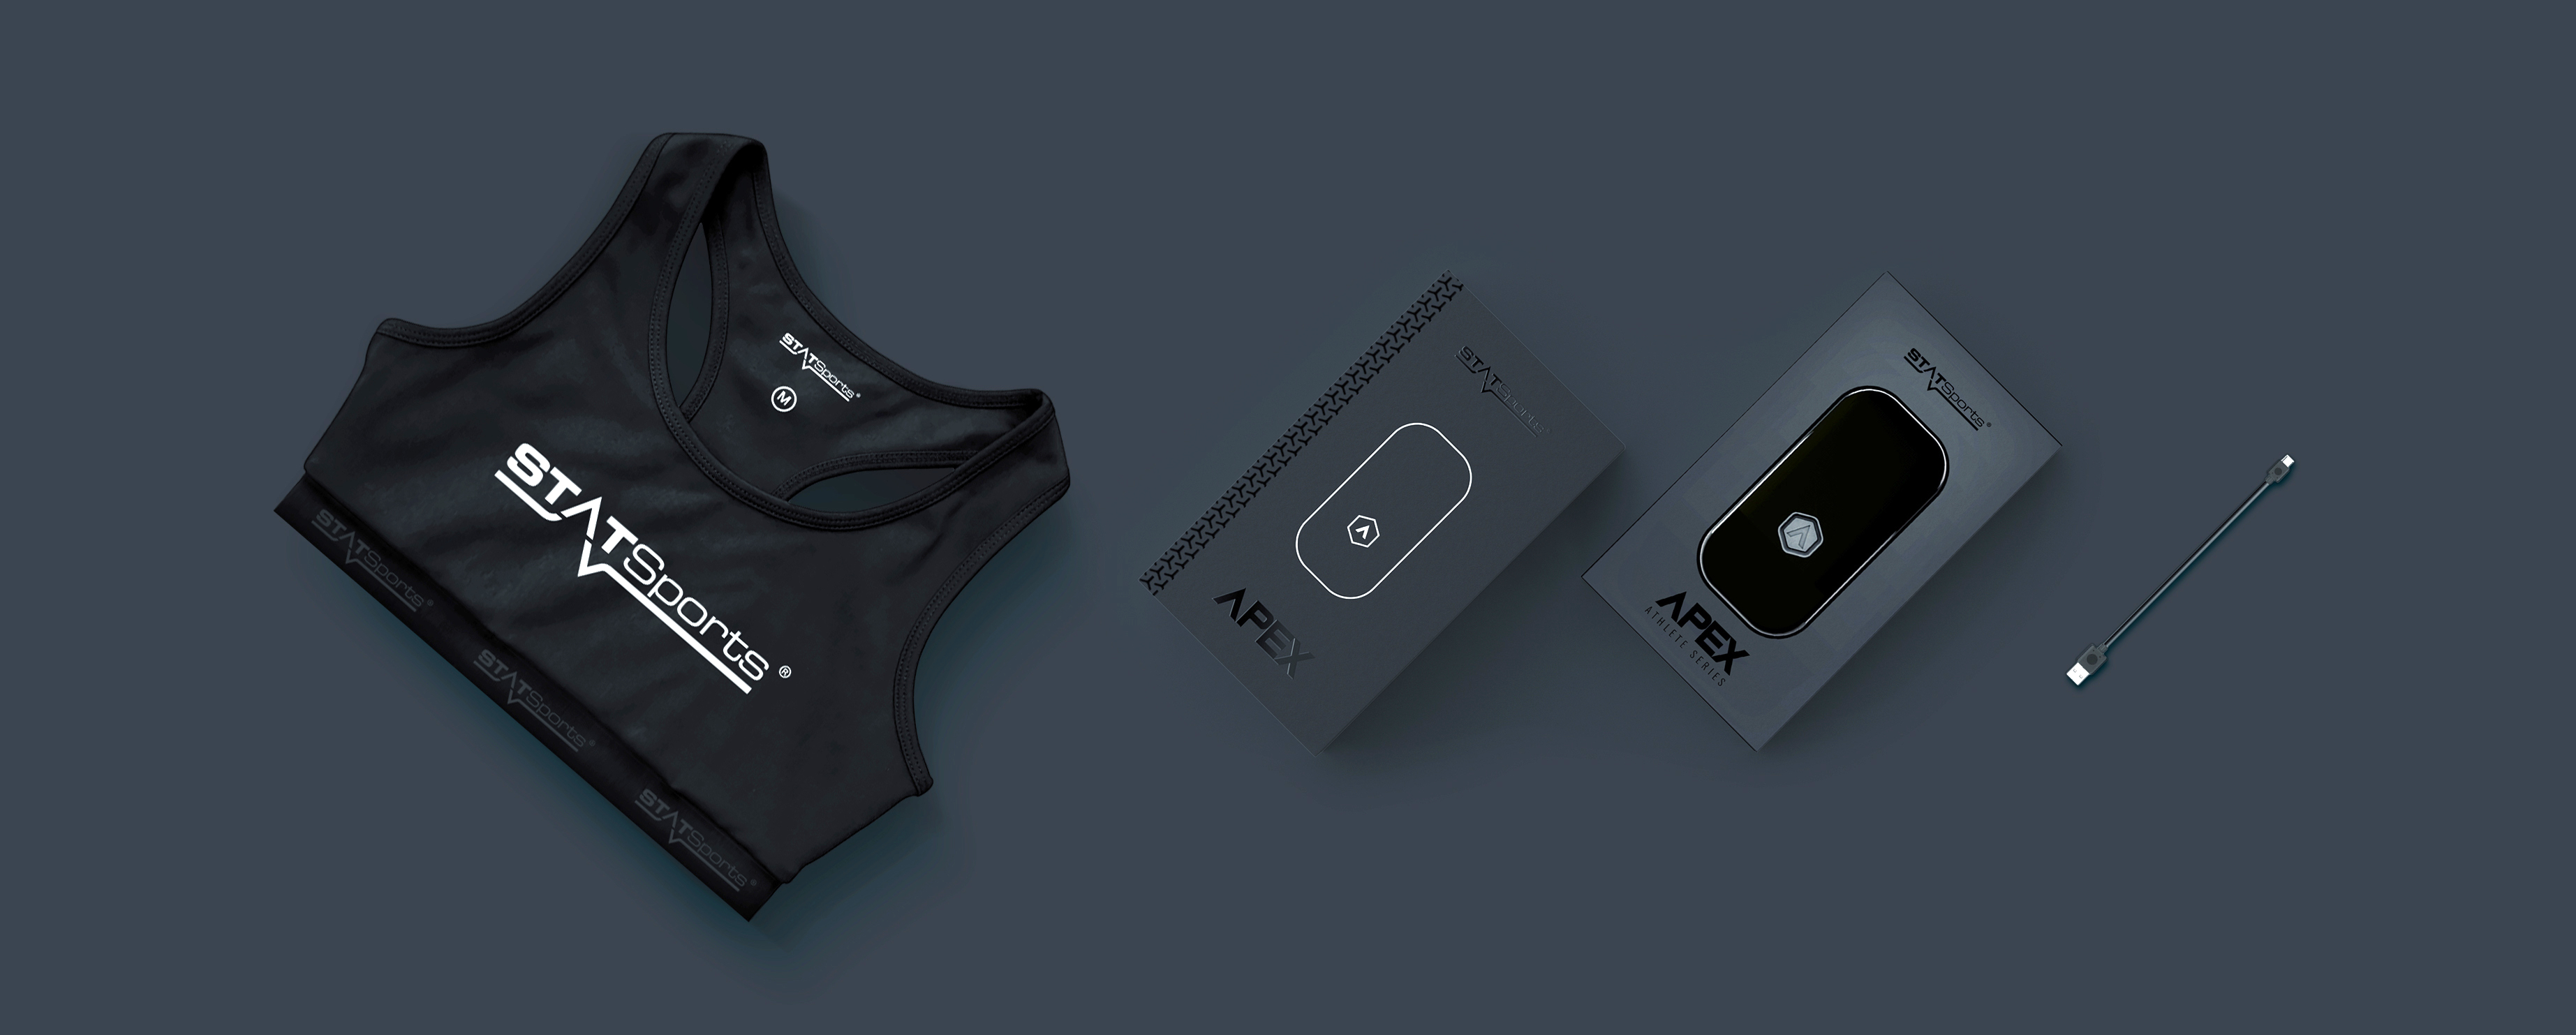 Athlete Series: Vest, boxed Apex pod and USB cable